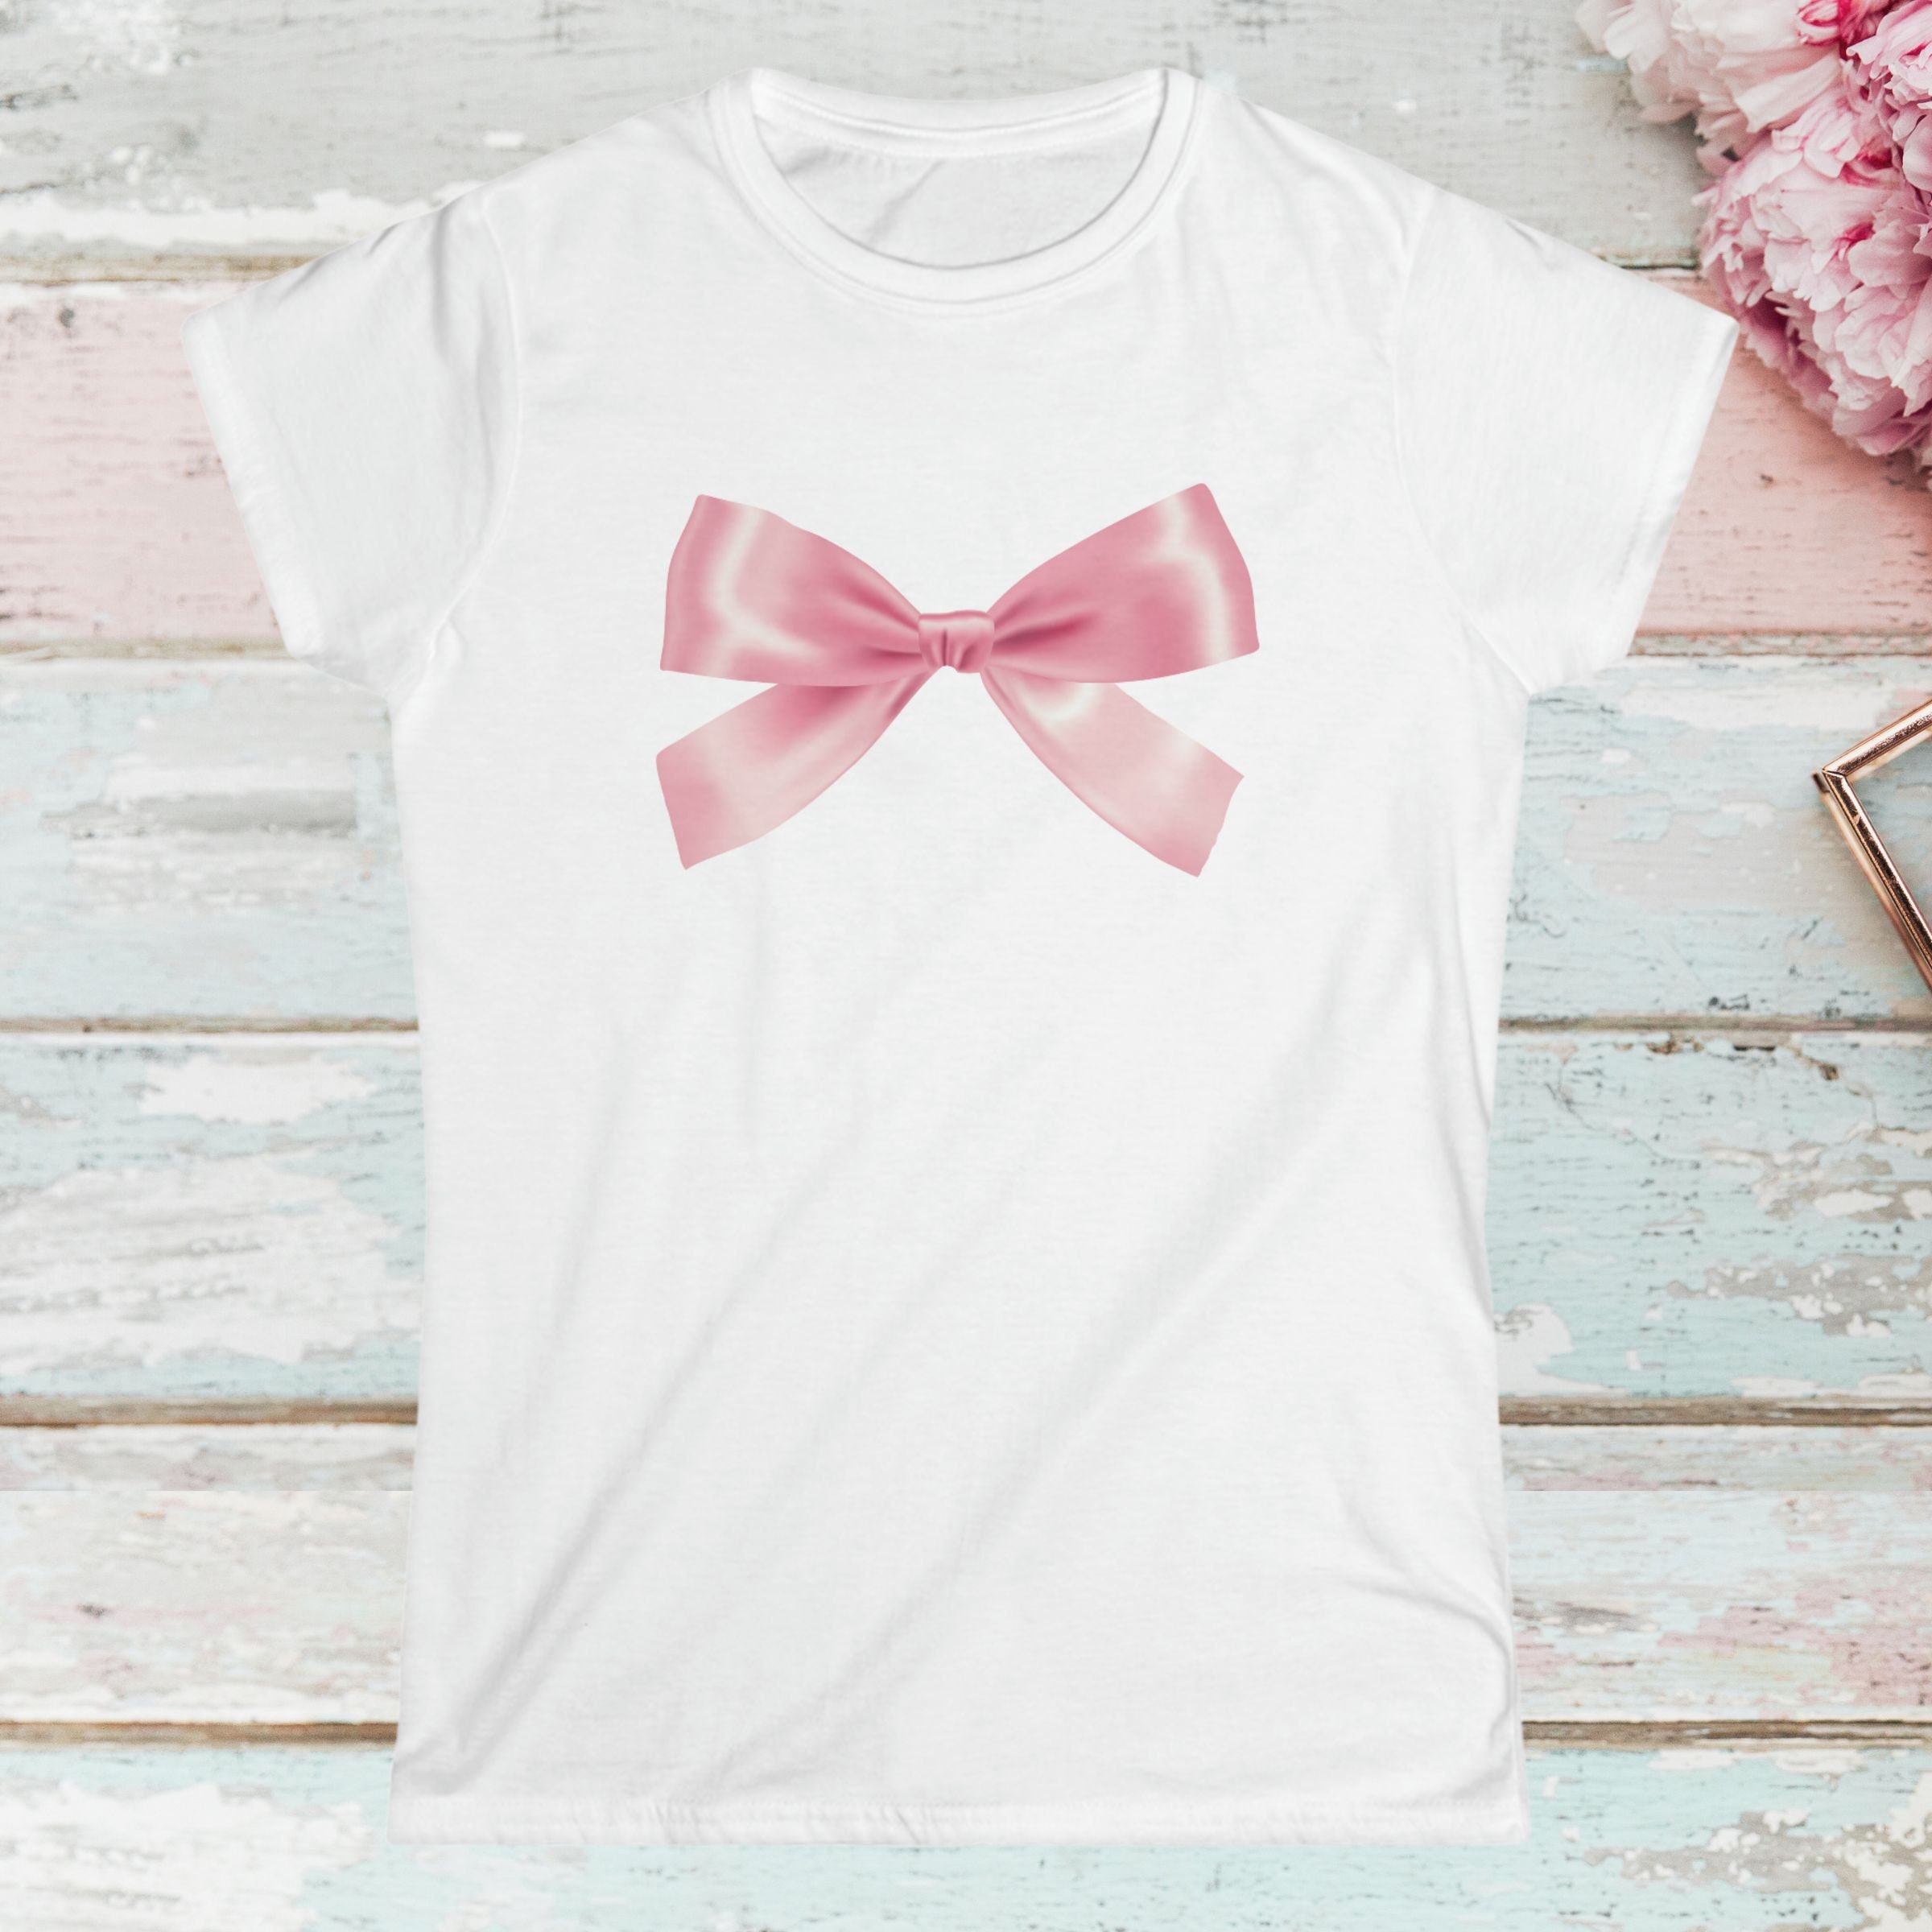 Coquette Pink Bow Tee Coquette Aesthetic Bow Shirt Coquette Shirt Pink ...